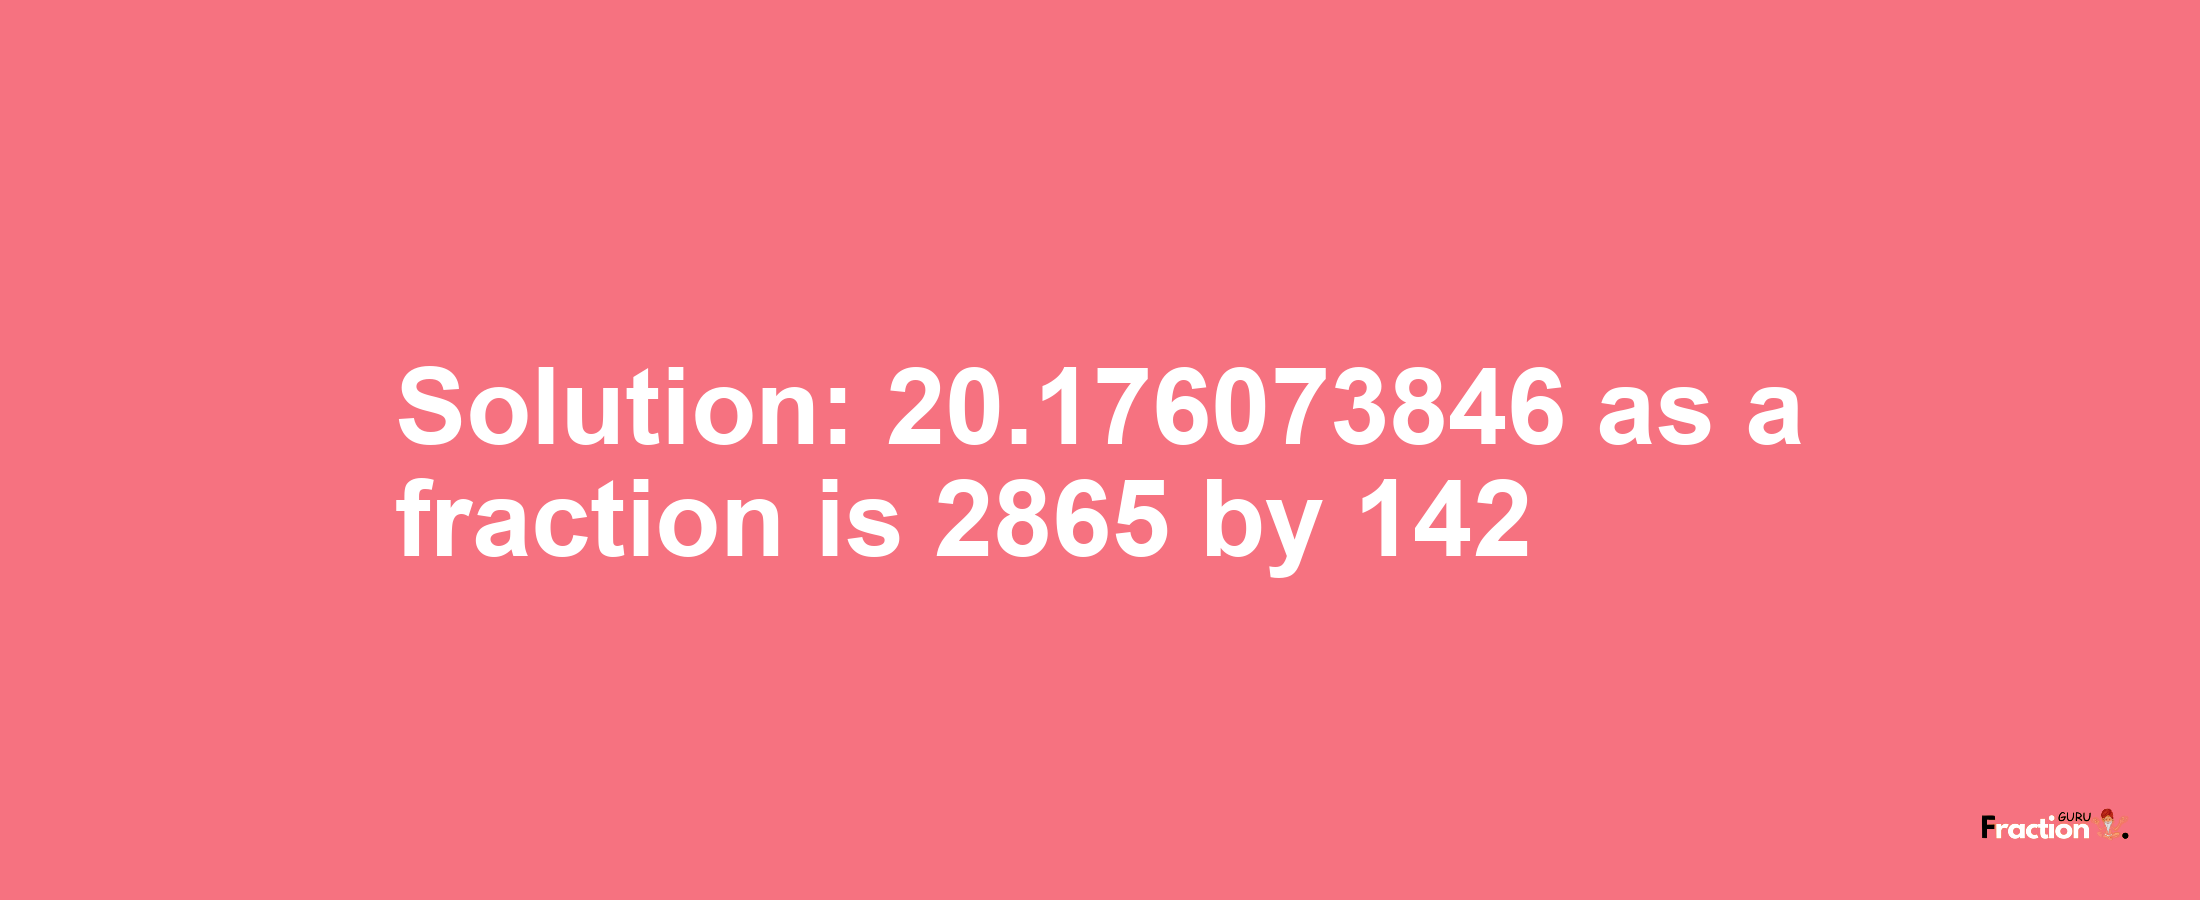 Solution:20.176073846 as a fraction is 2865/142